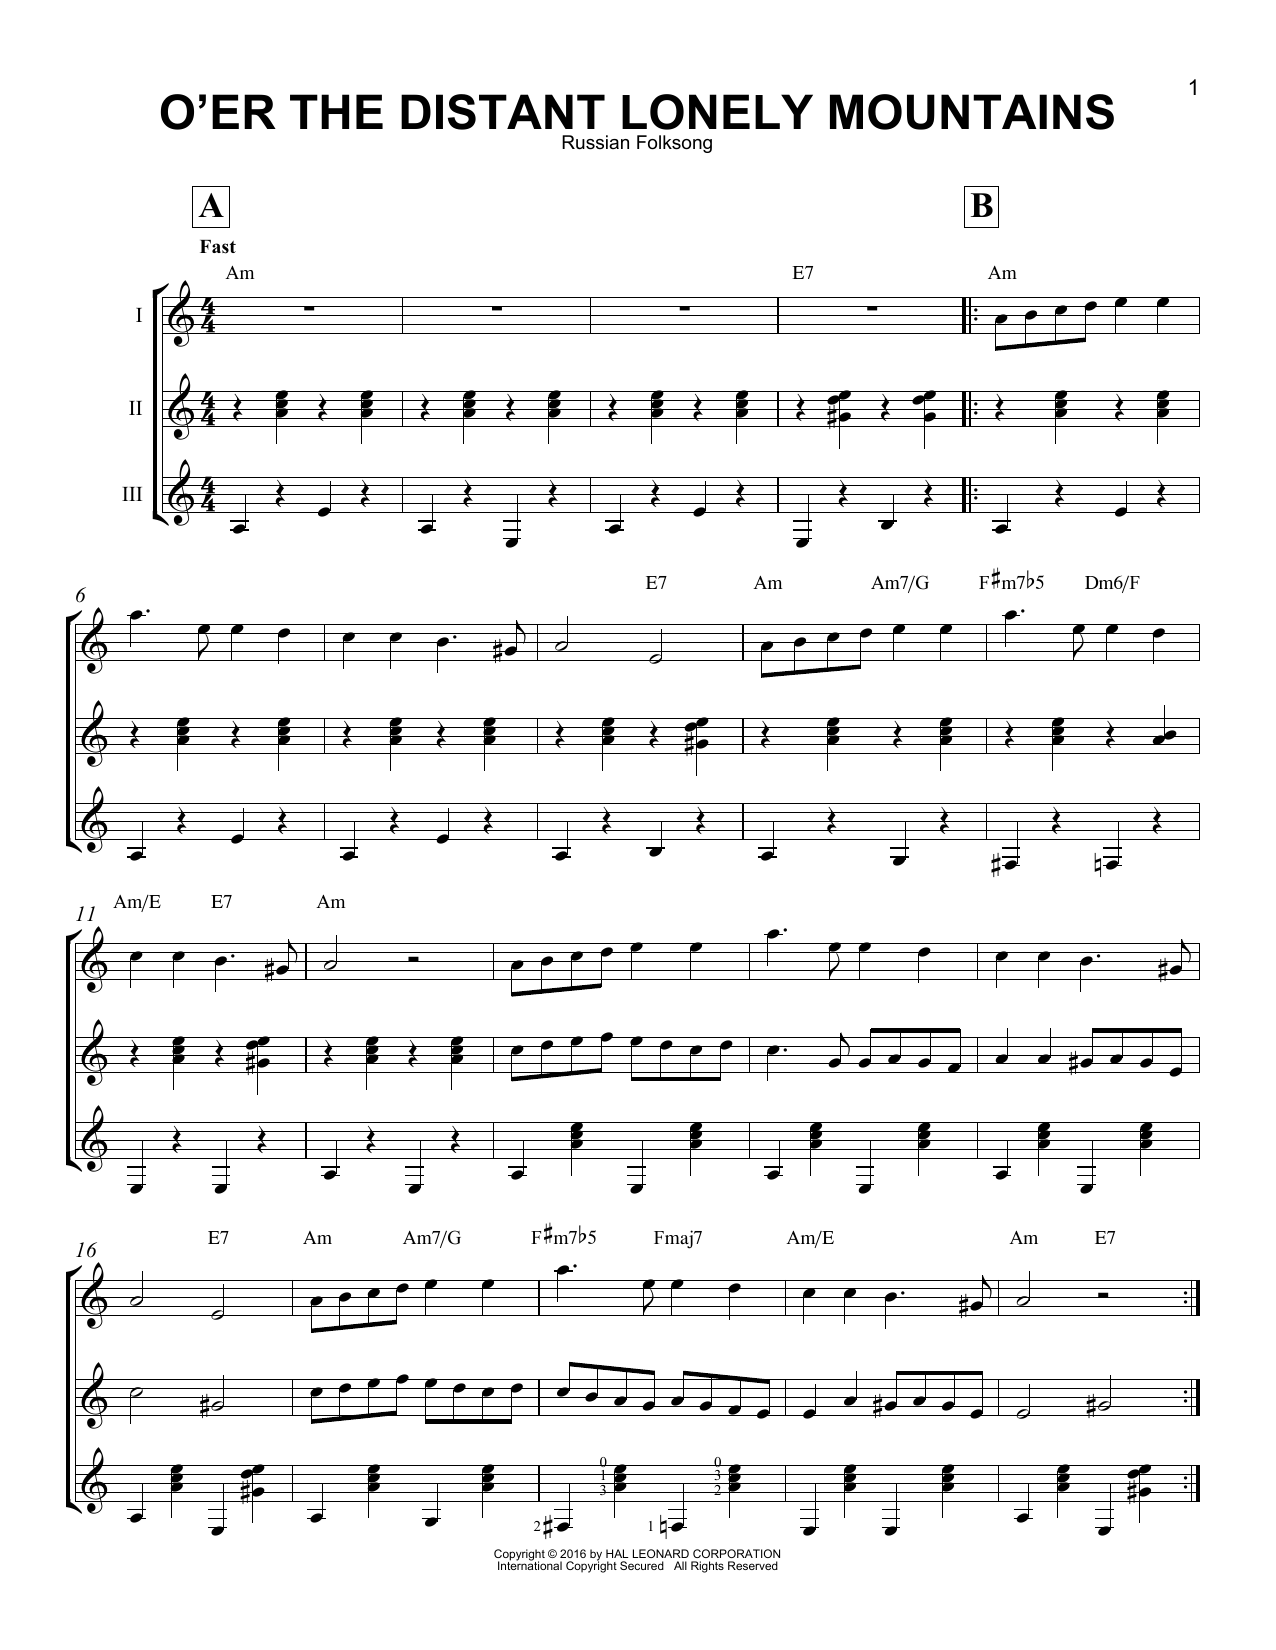 Download Russian Folksong O'er The Distant Lonely Mountains Sheet Music